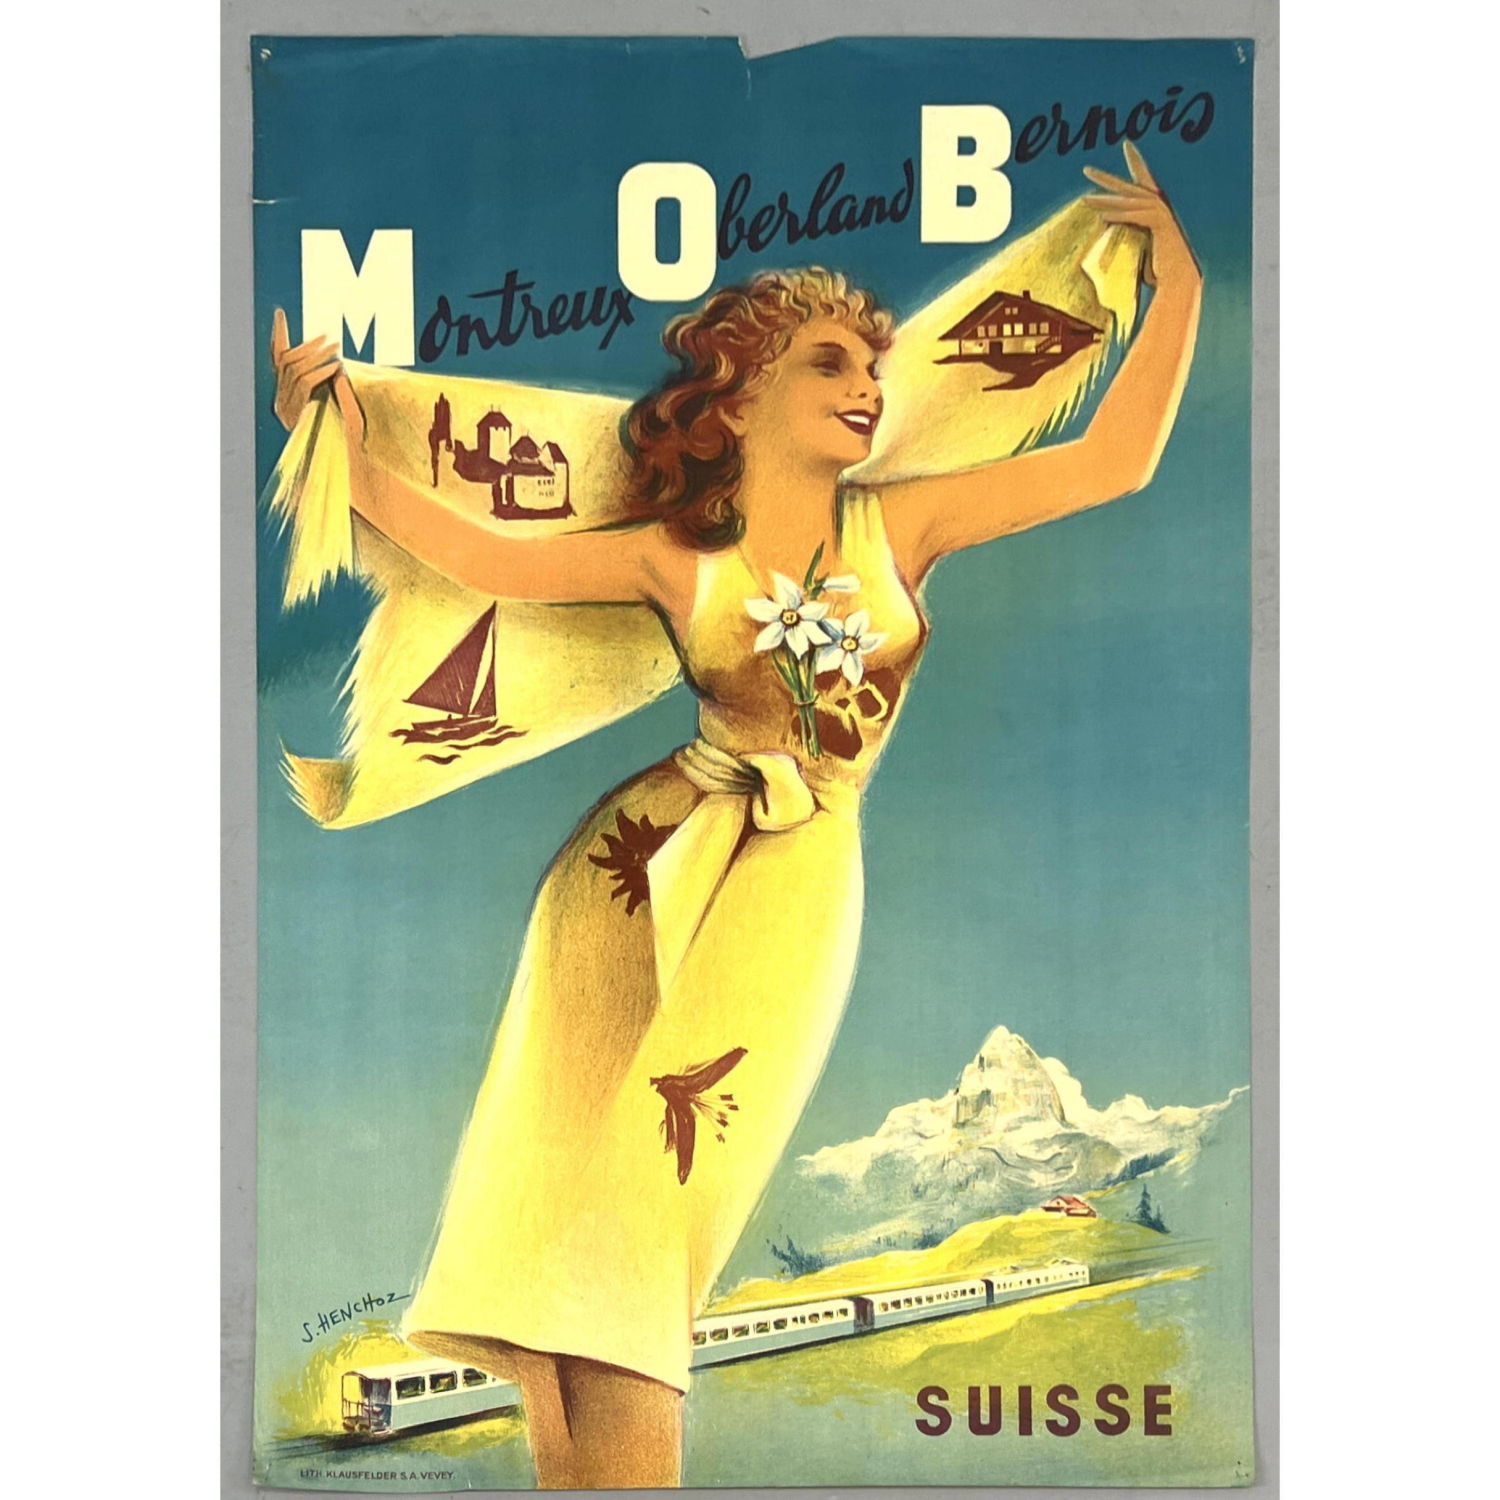 SUISSE Travel Tourism Advertising Poster.